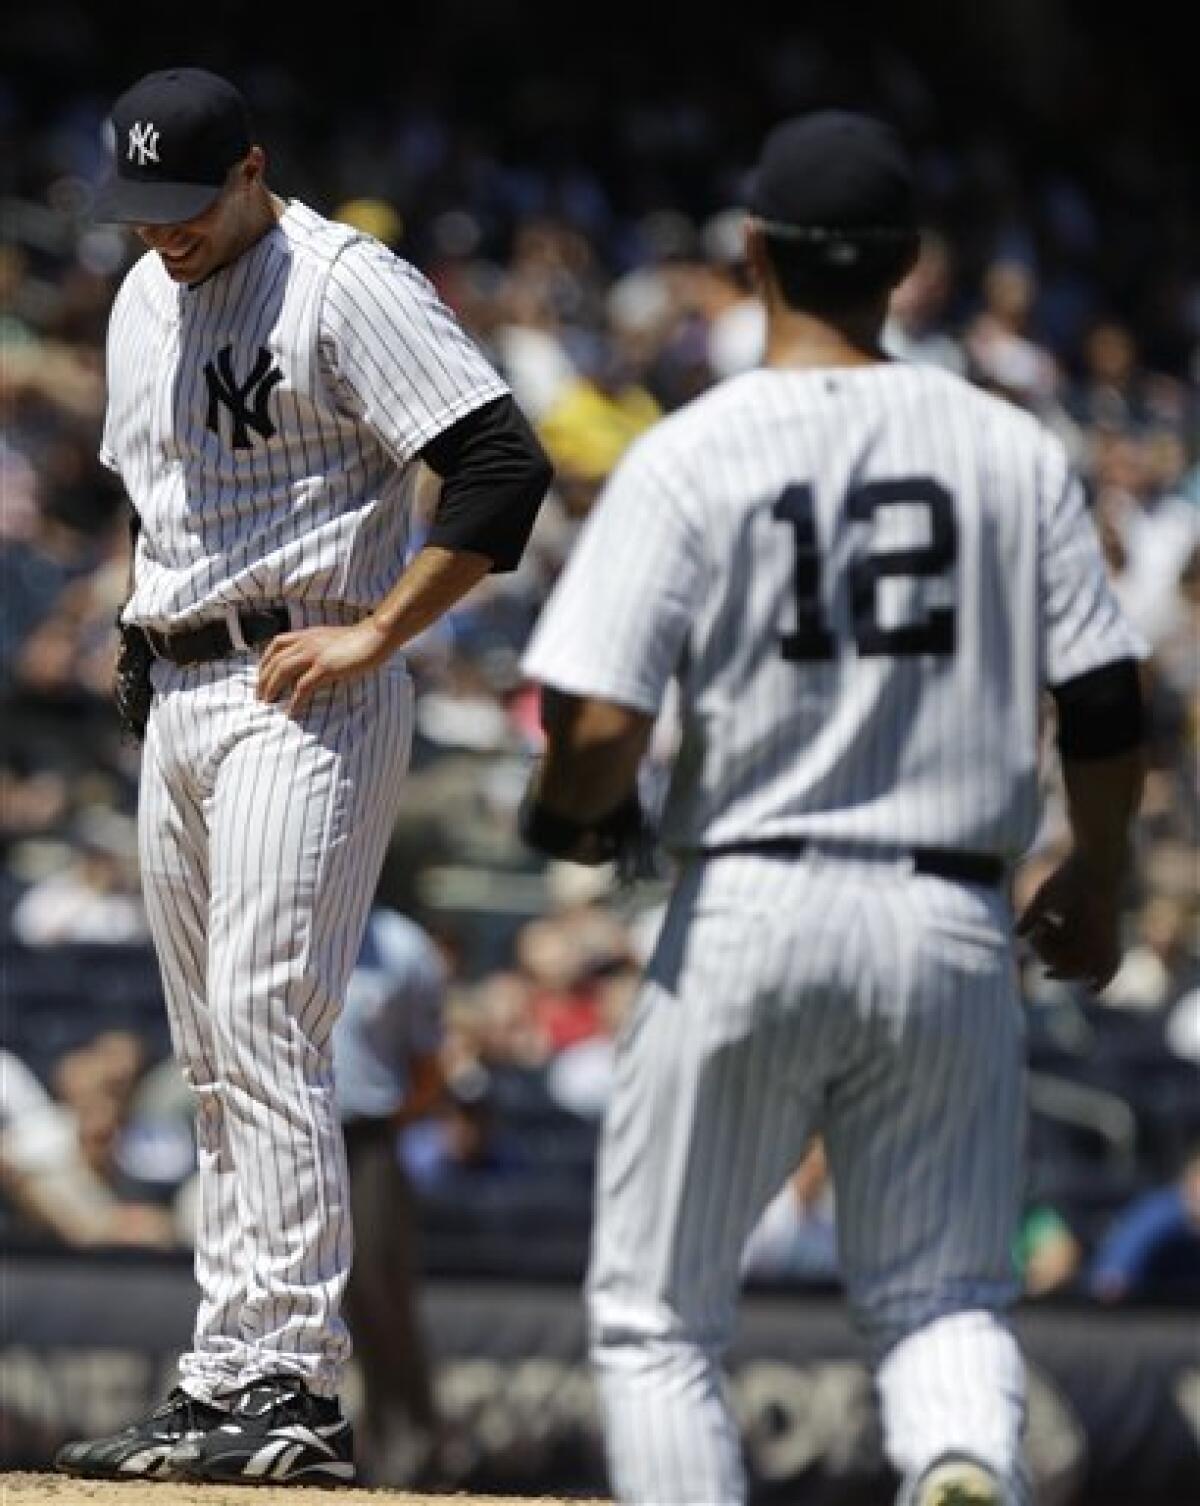 Pettitte fractures ankle in Yankees' 5-4 win - The San Diego Union-Tribune